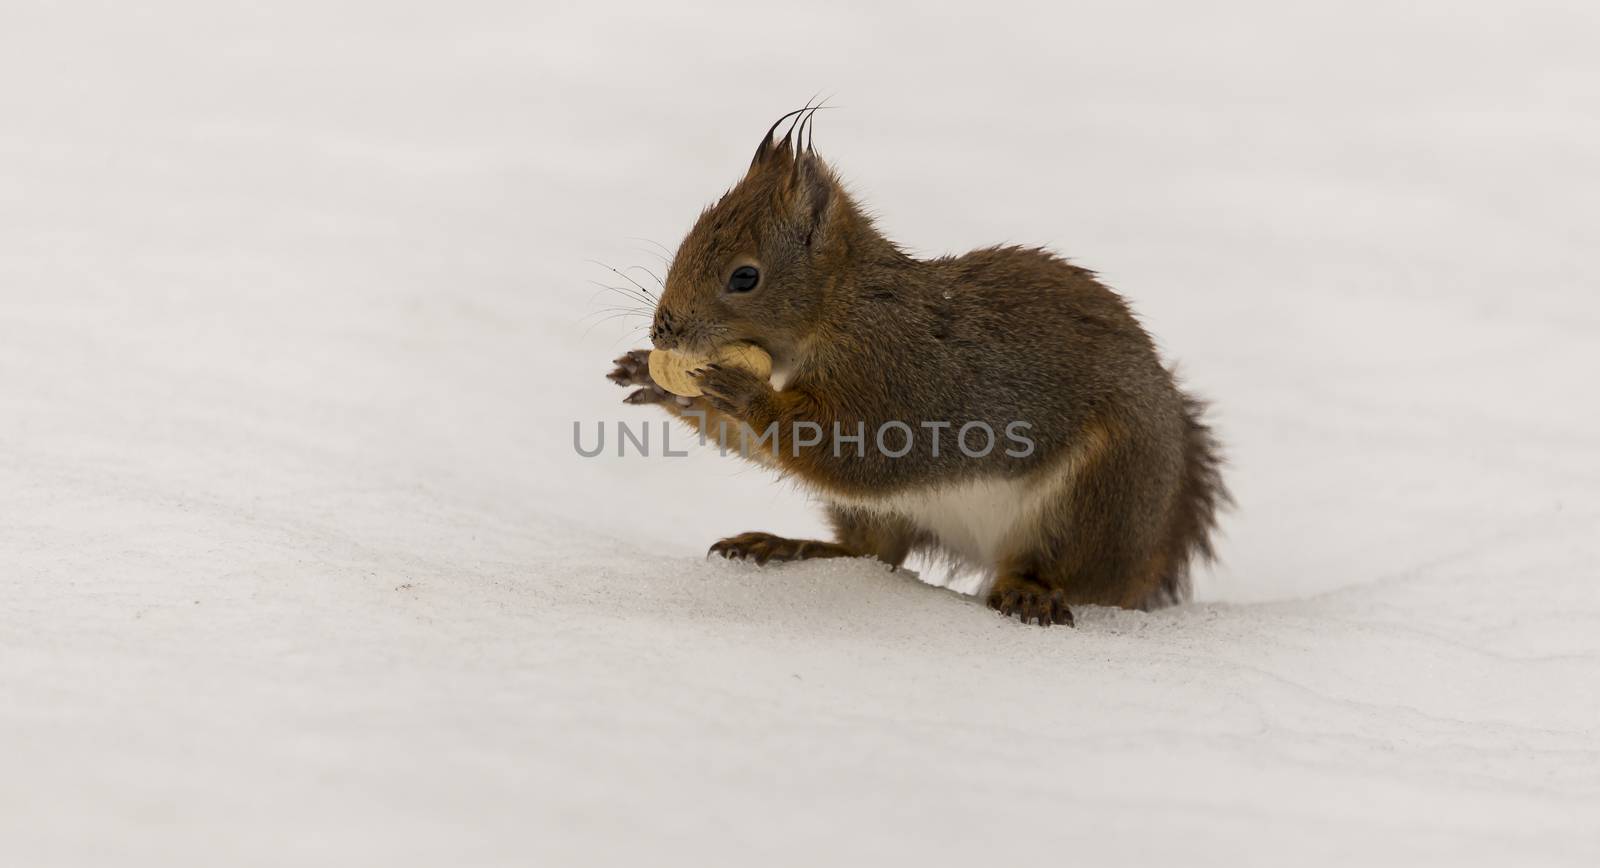 A red squirrel eating a nut in the snow